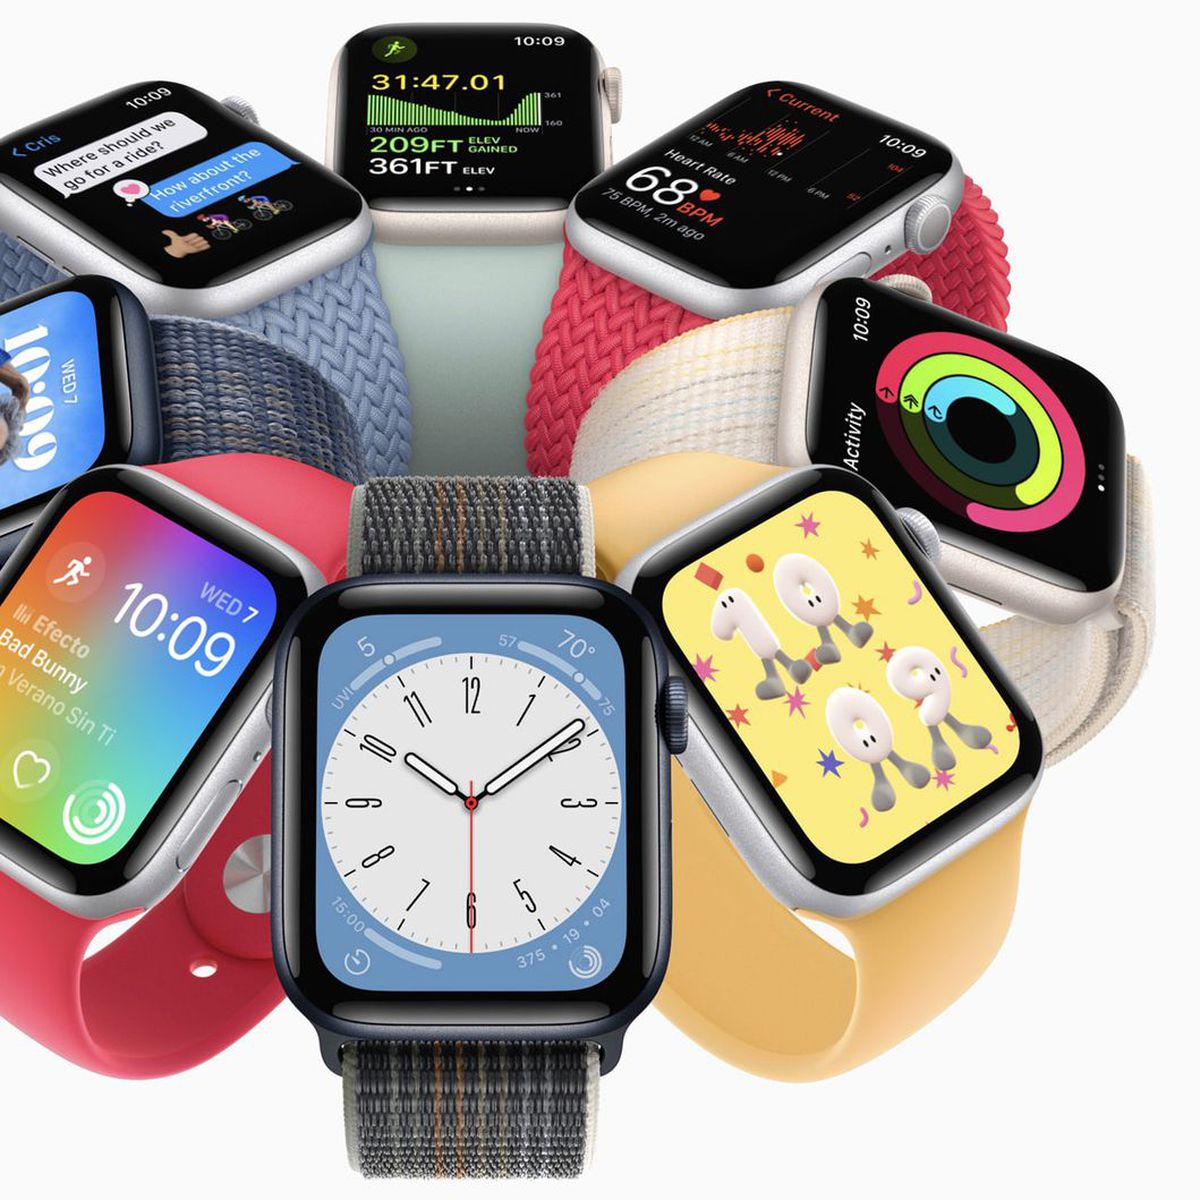 Apple Watch SE: Buying Advice, Deals, Features, Comparison Guides and More